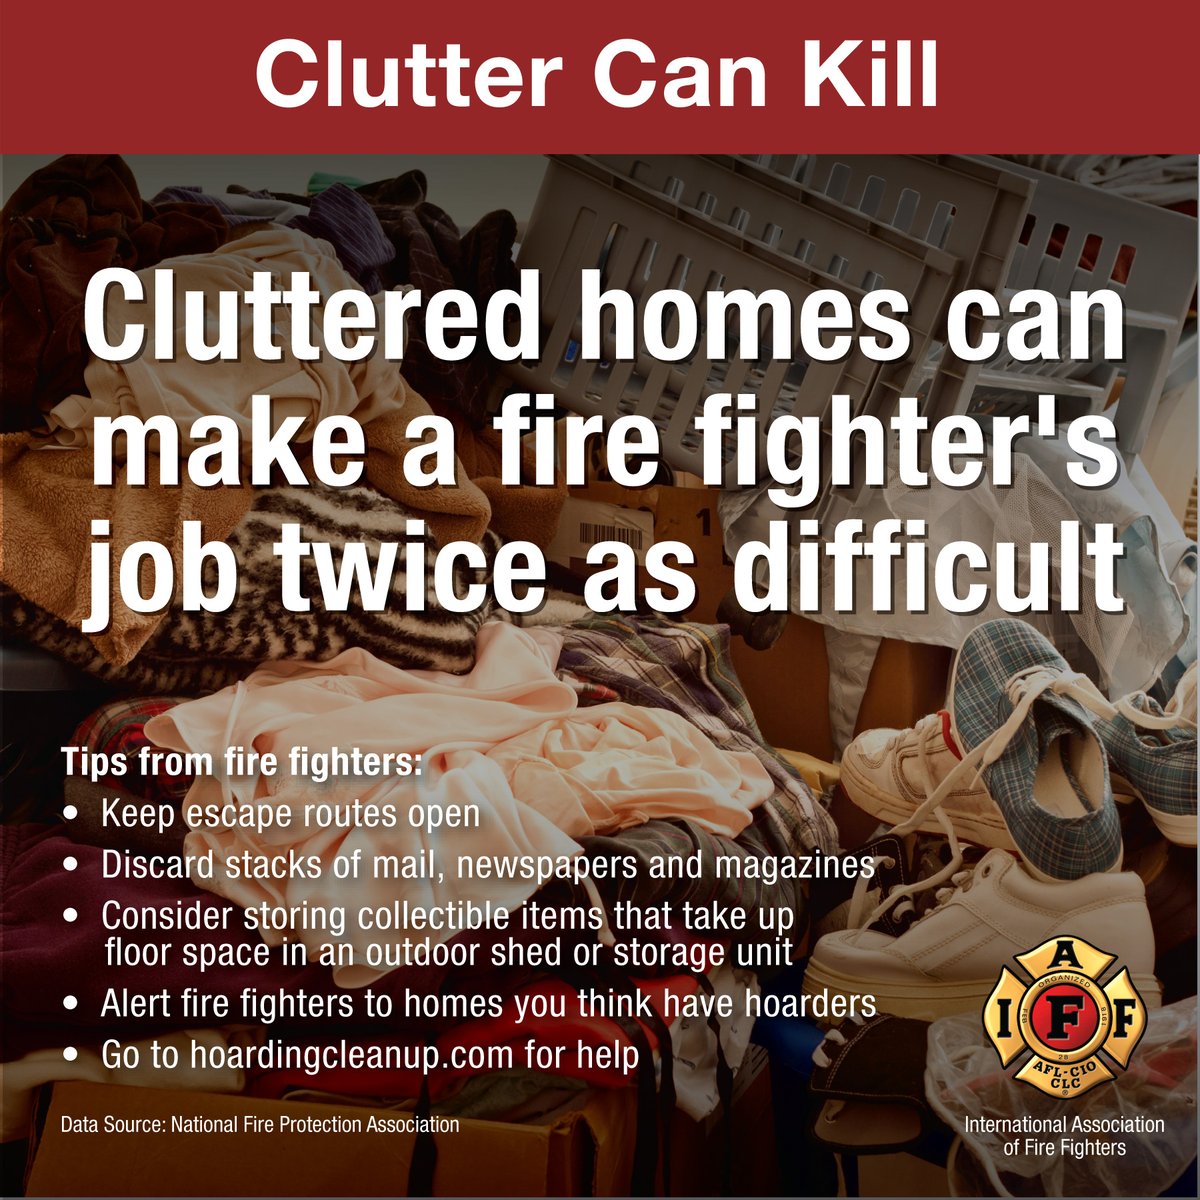 Clutter provides fuel for a fire to spread quickly. So make it a point to keep your home free of clutter. #IAFFSafetyTips